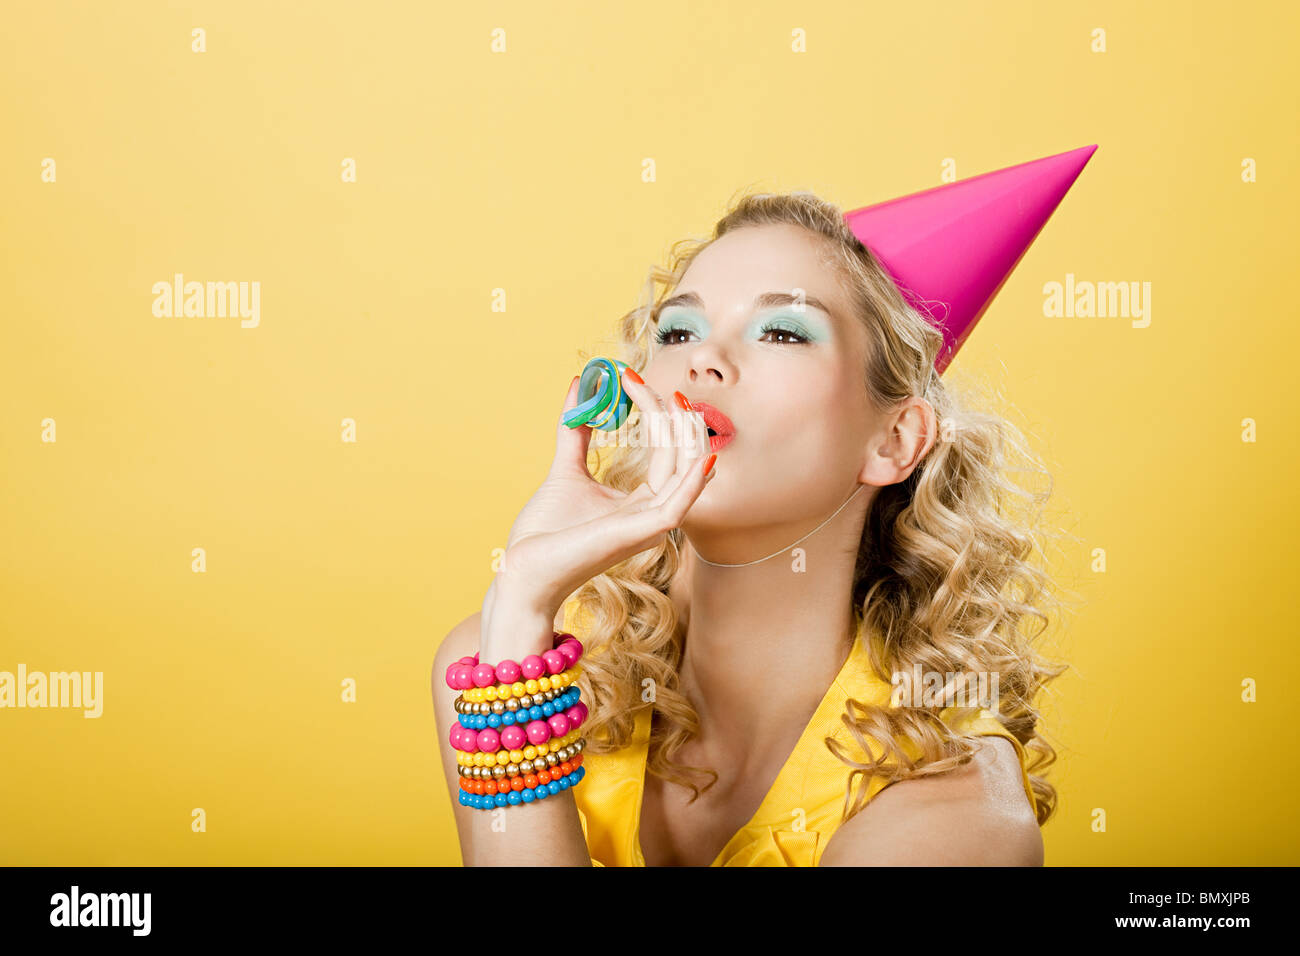 Young woman wearing party hat avec party streamer Banque D'Images